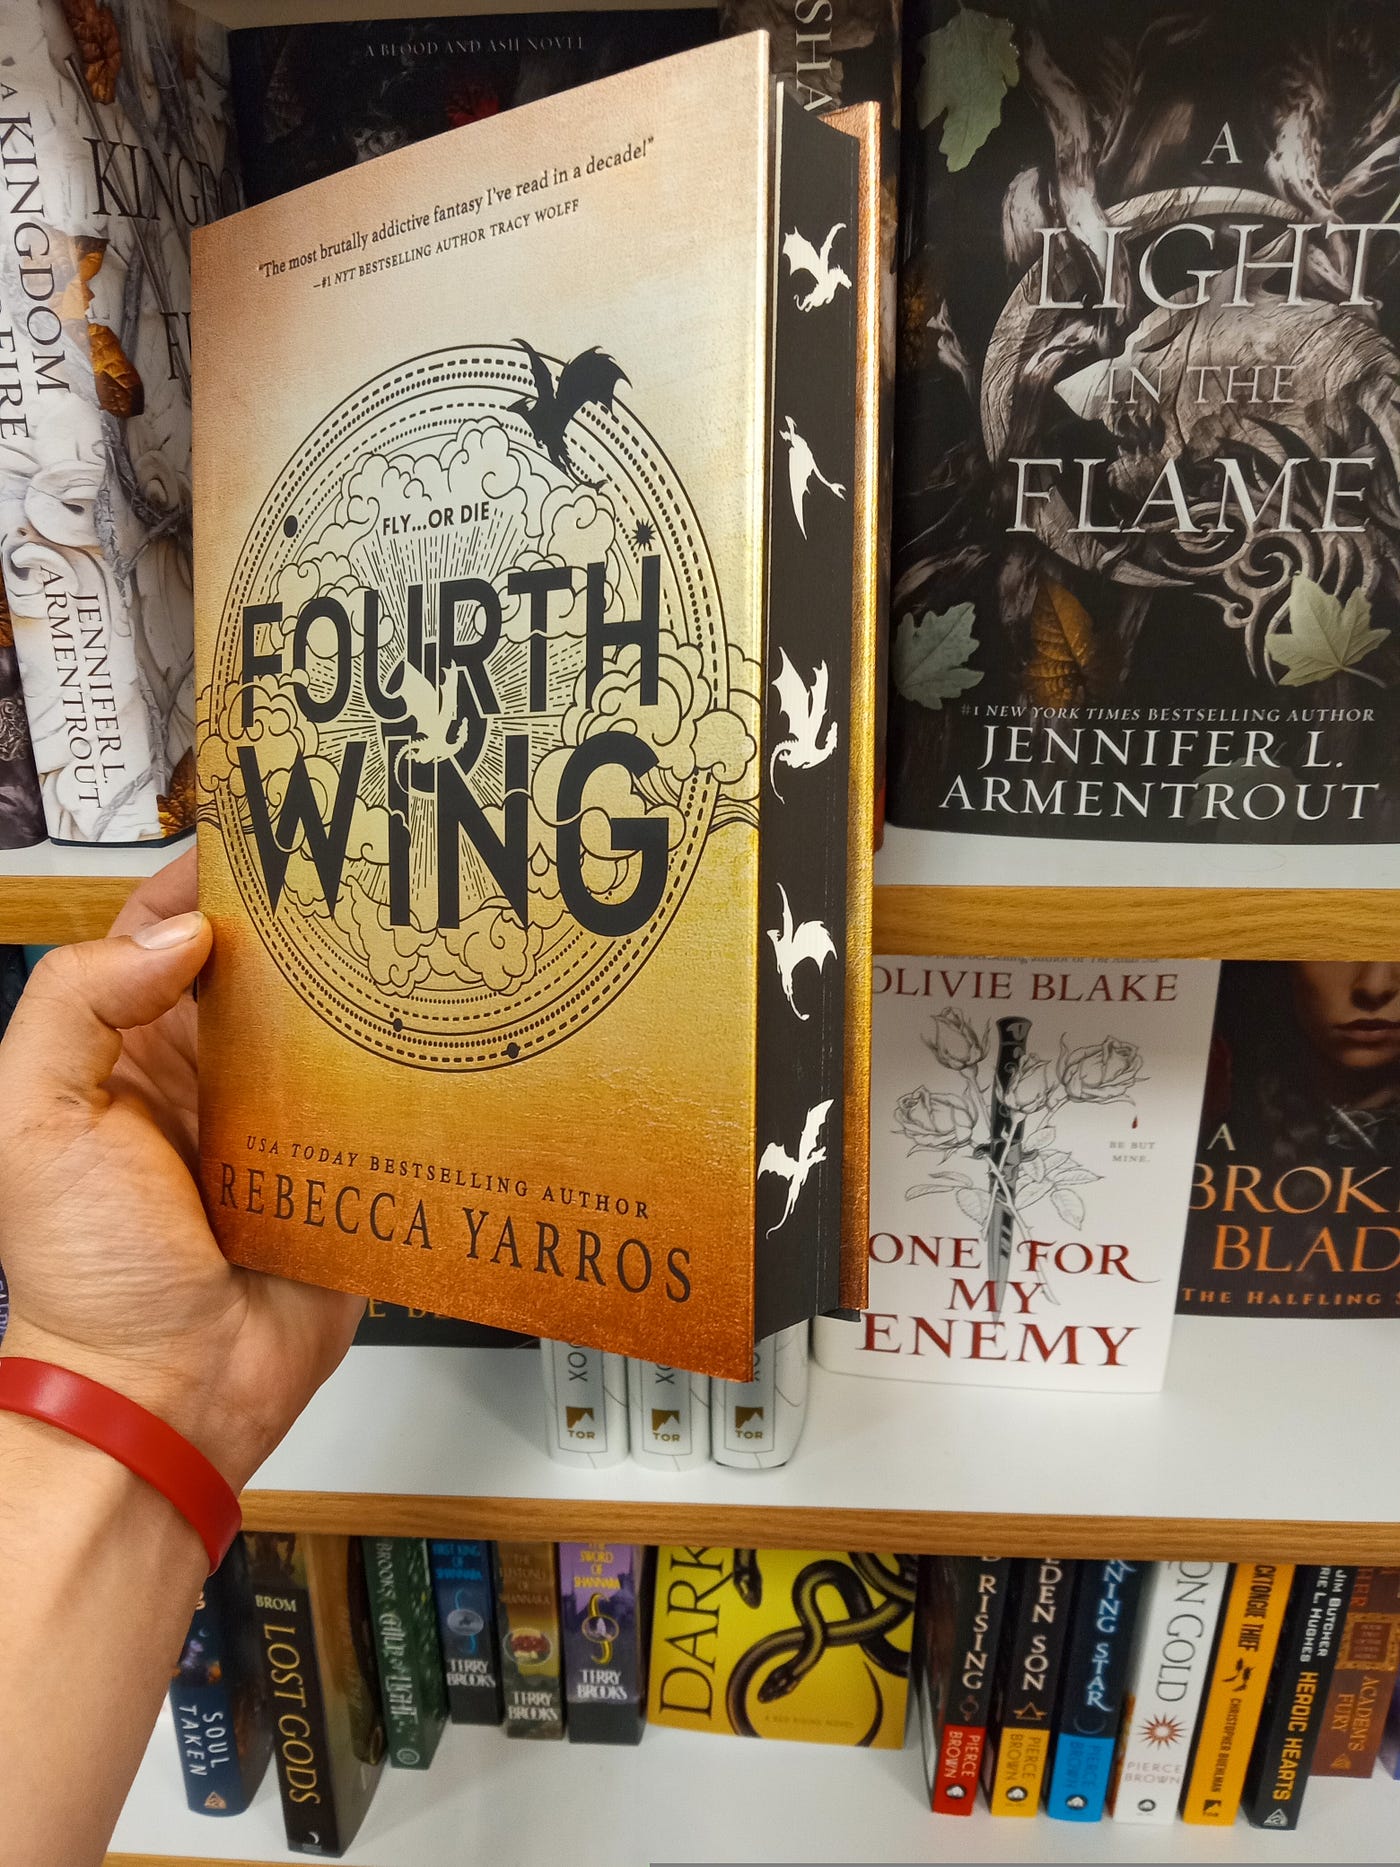 Staff Review: Fourth Wing & Iron Flame